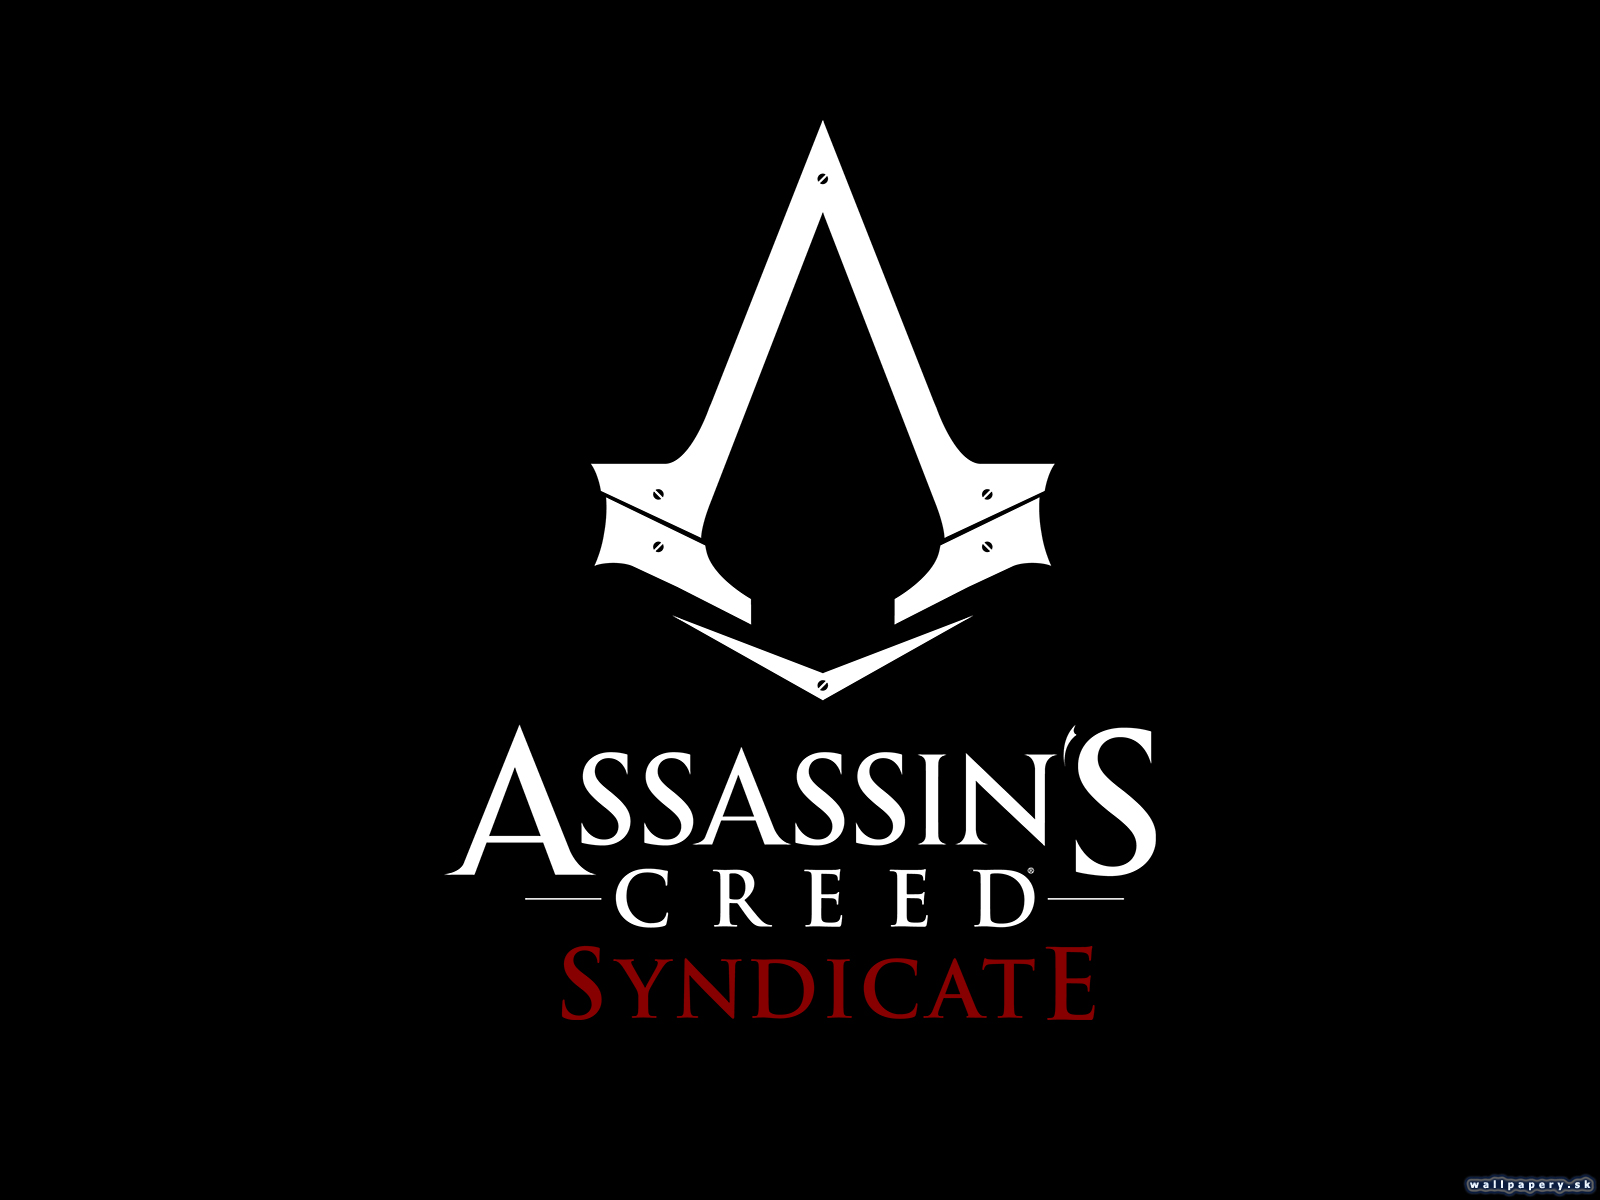 Assassin's Creed: Syndicate - wallpaper 4